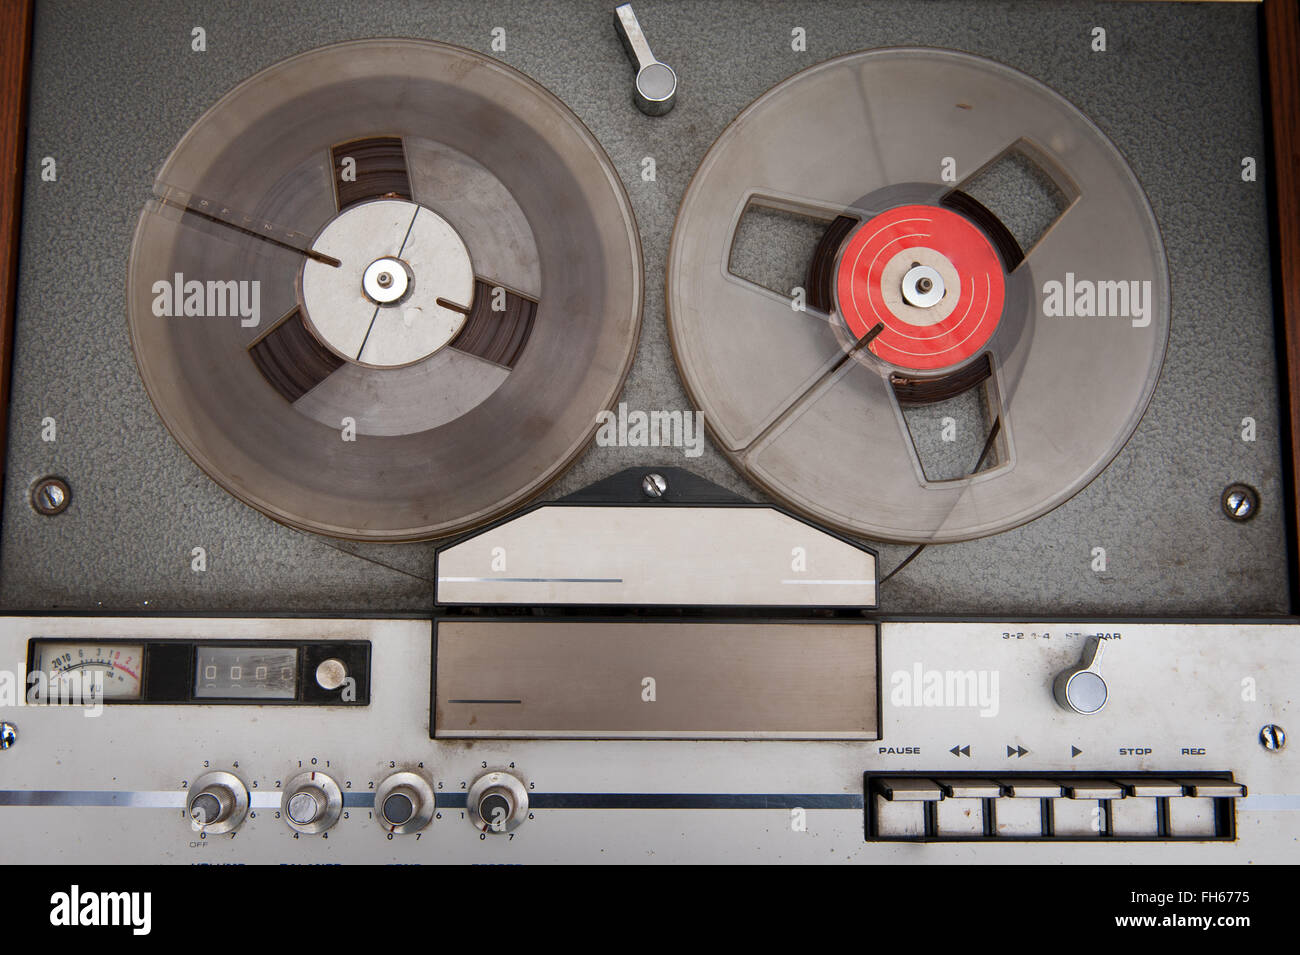 https://c8.alamy.com/comp/FH6775/vintage-audio-tape-music-recorder-with-reels-and-knobs-FH6775.jpg